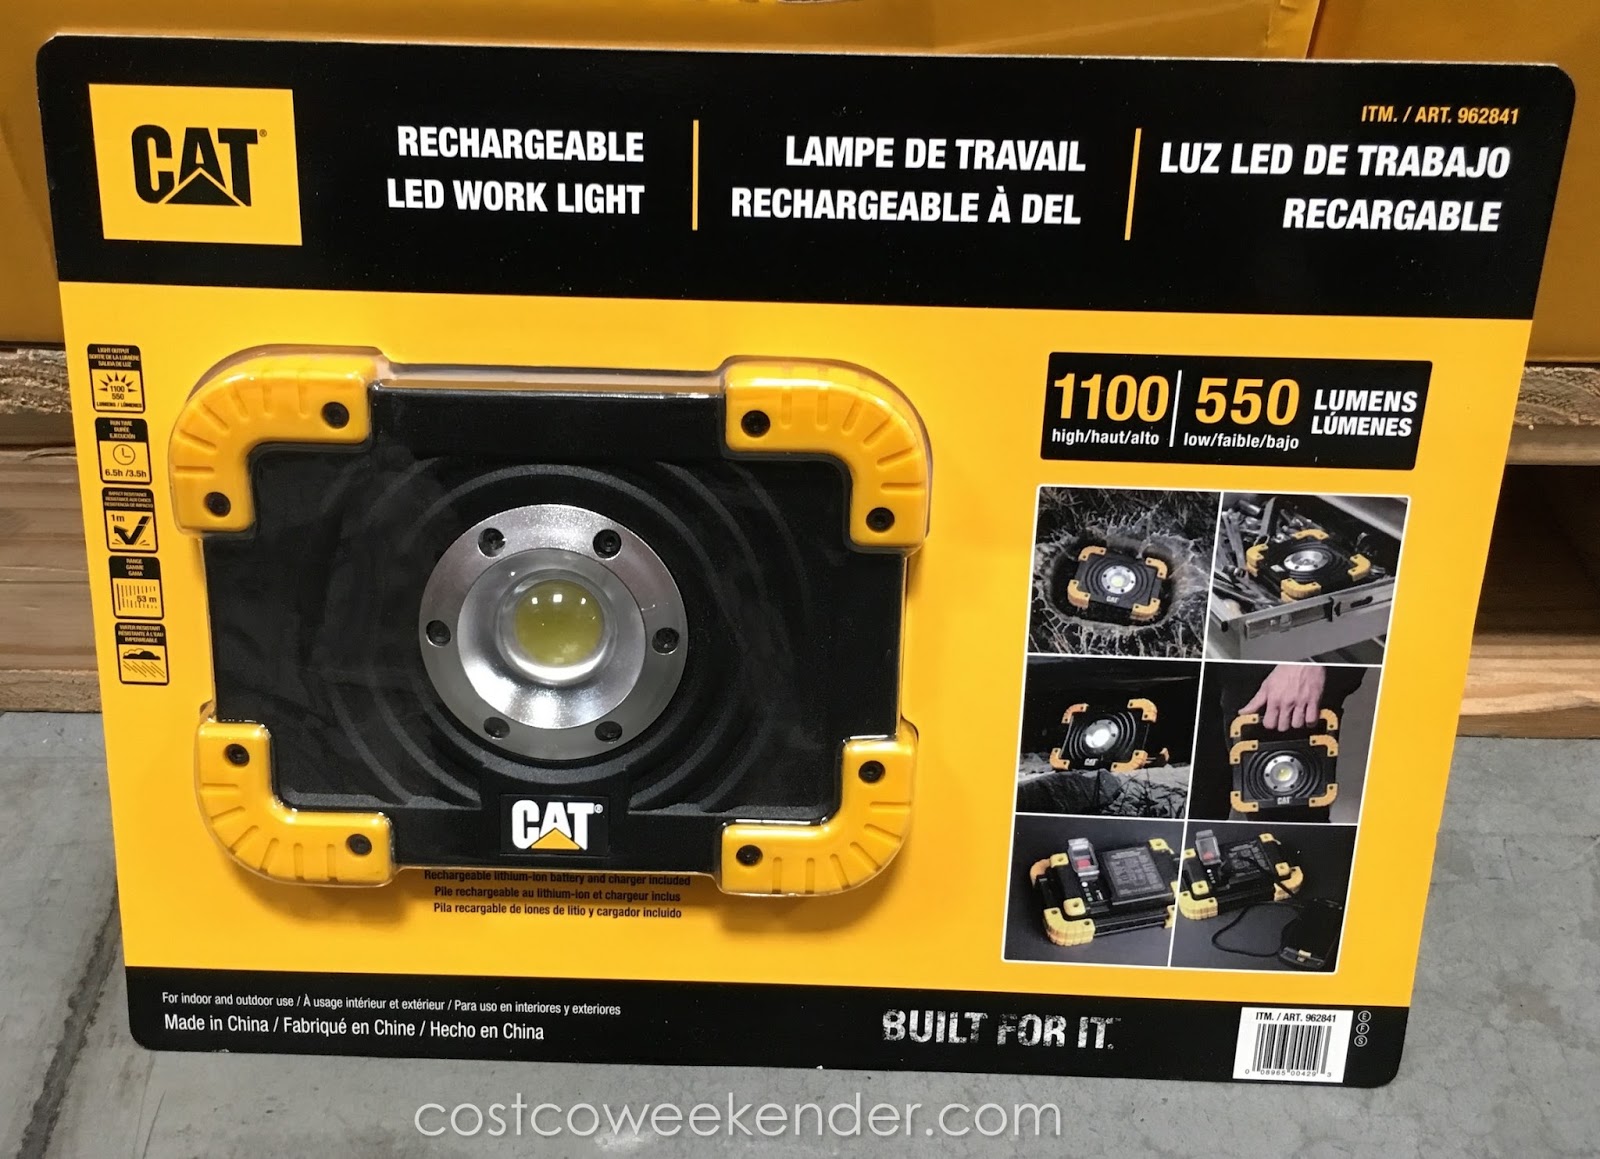 O/T - LED Worklight at Costco - Ford Truck Enthusiasts Forums